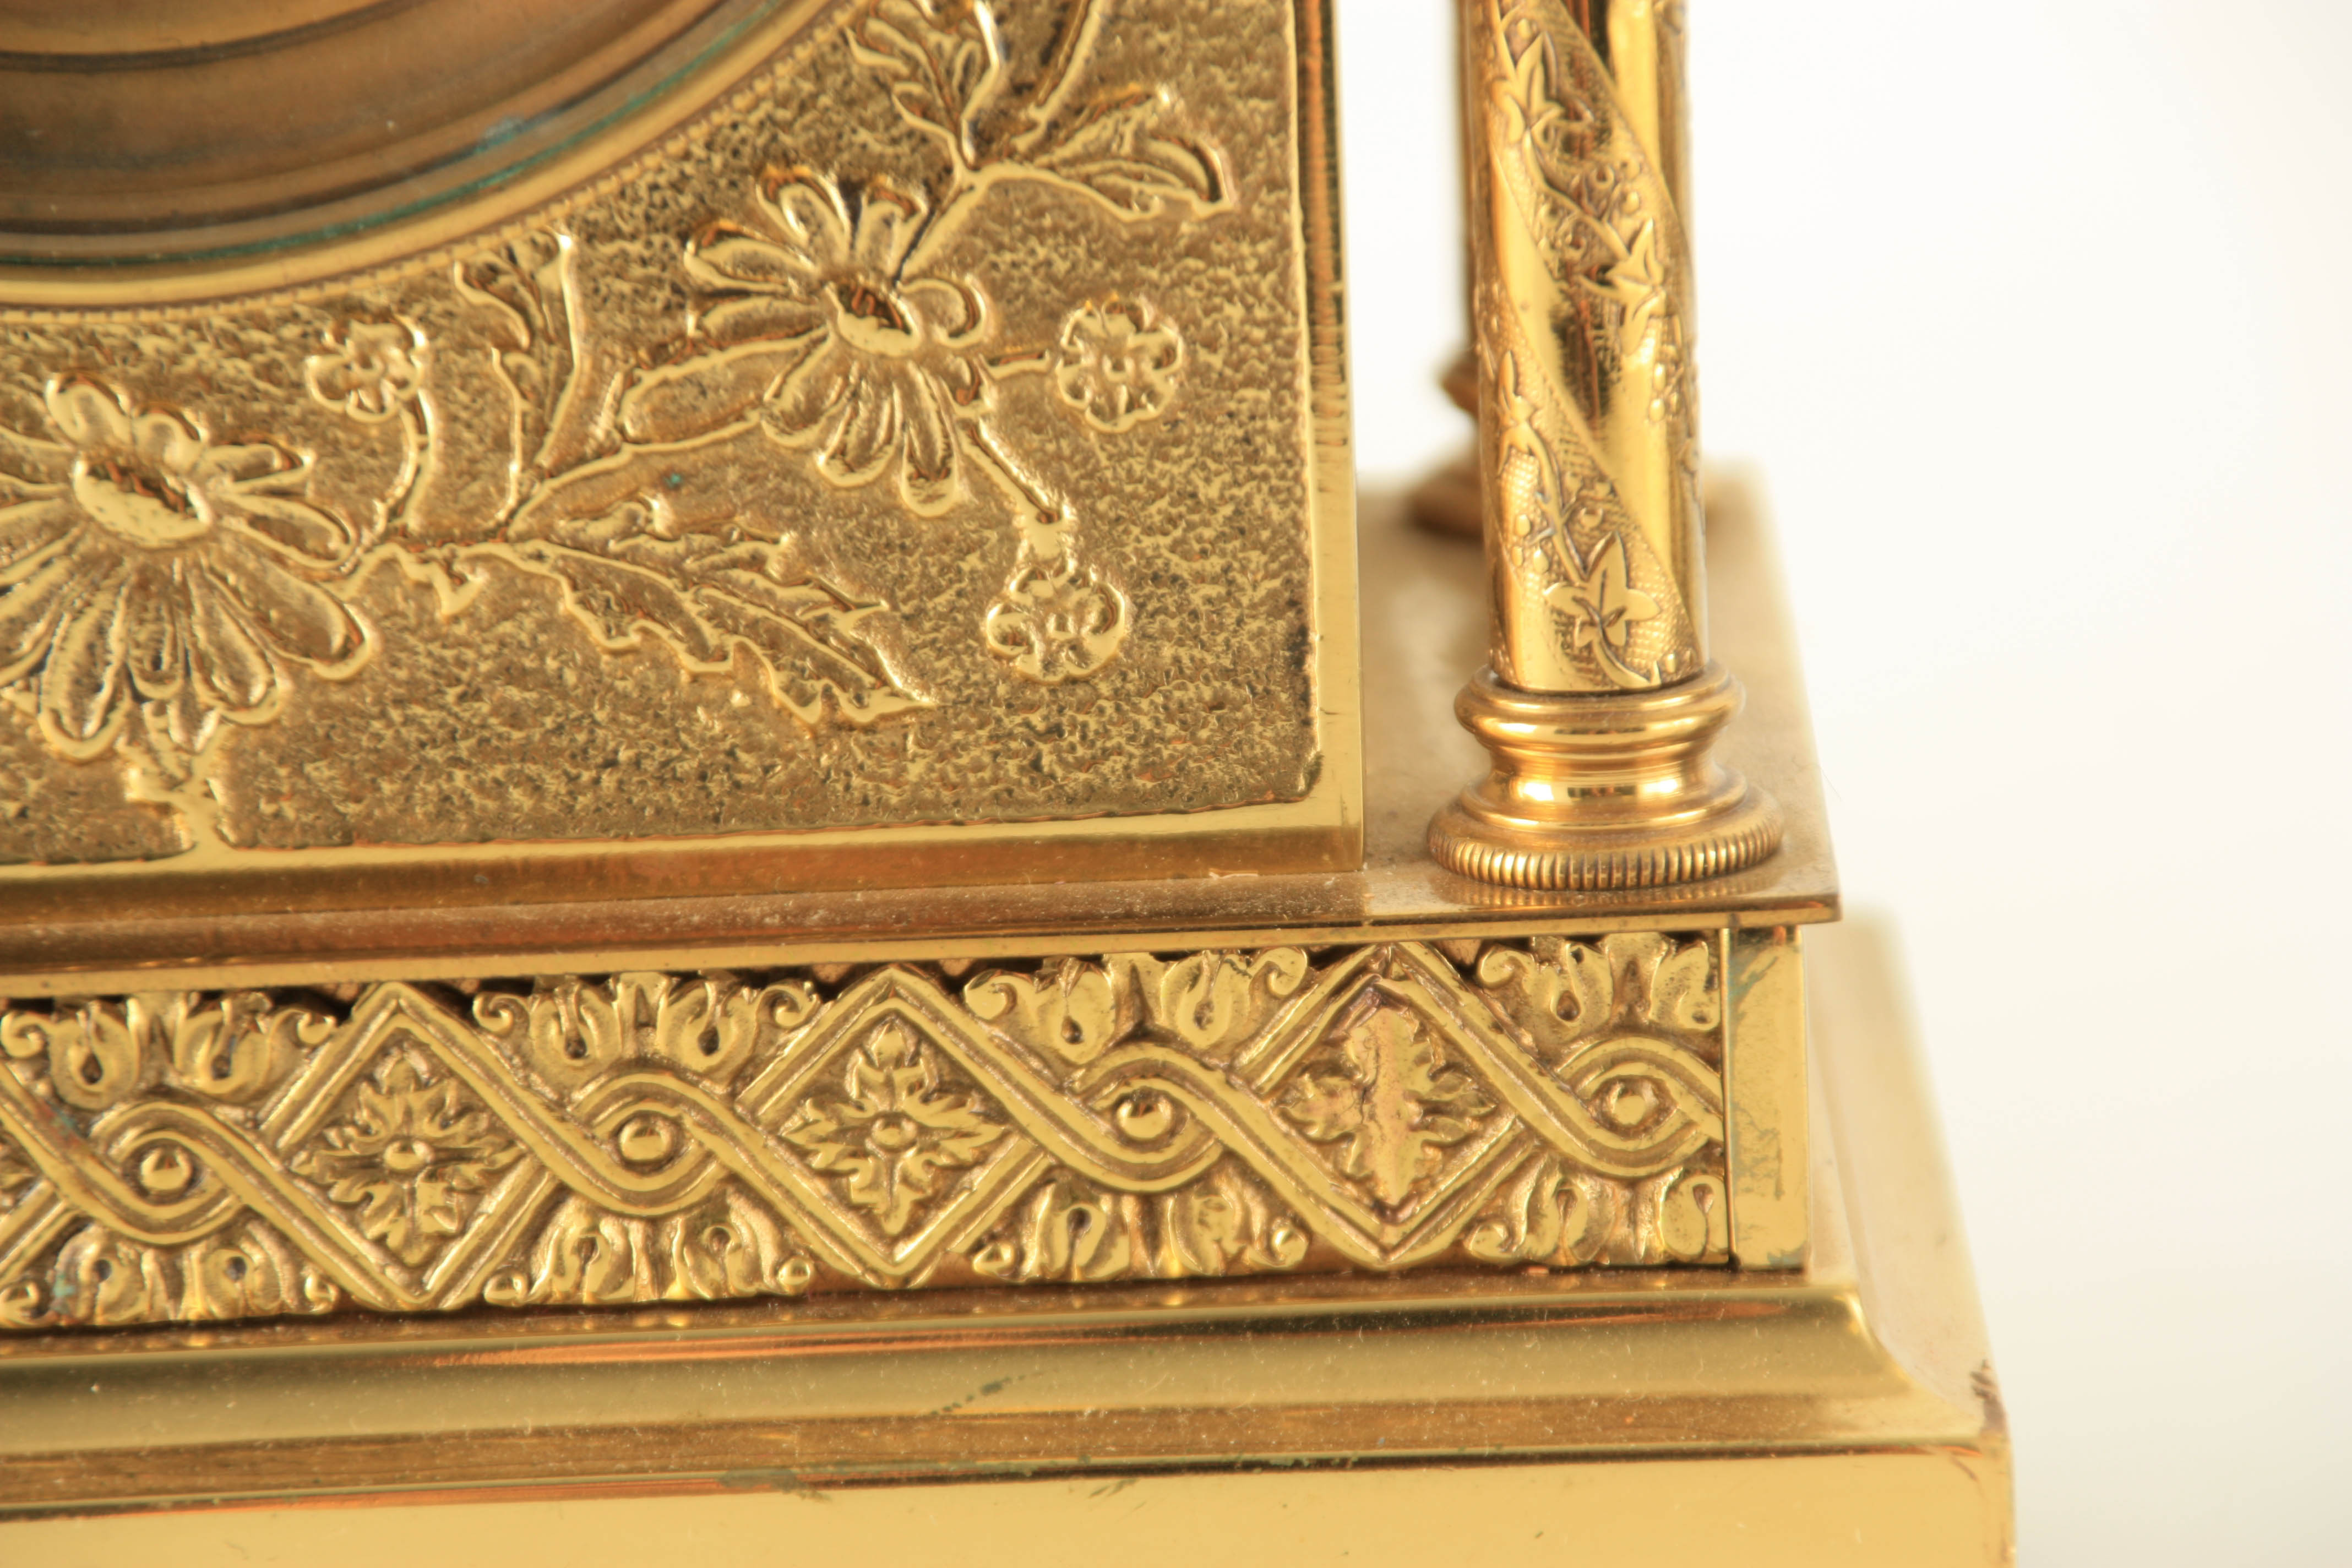 A LATE 19TH CENTURY FRENCH BRASS CASED MANTEL CLOCK having a domed top pediment above a floral - Image 4 of 12